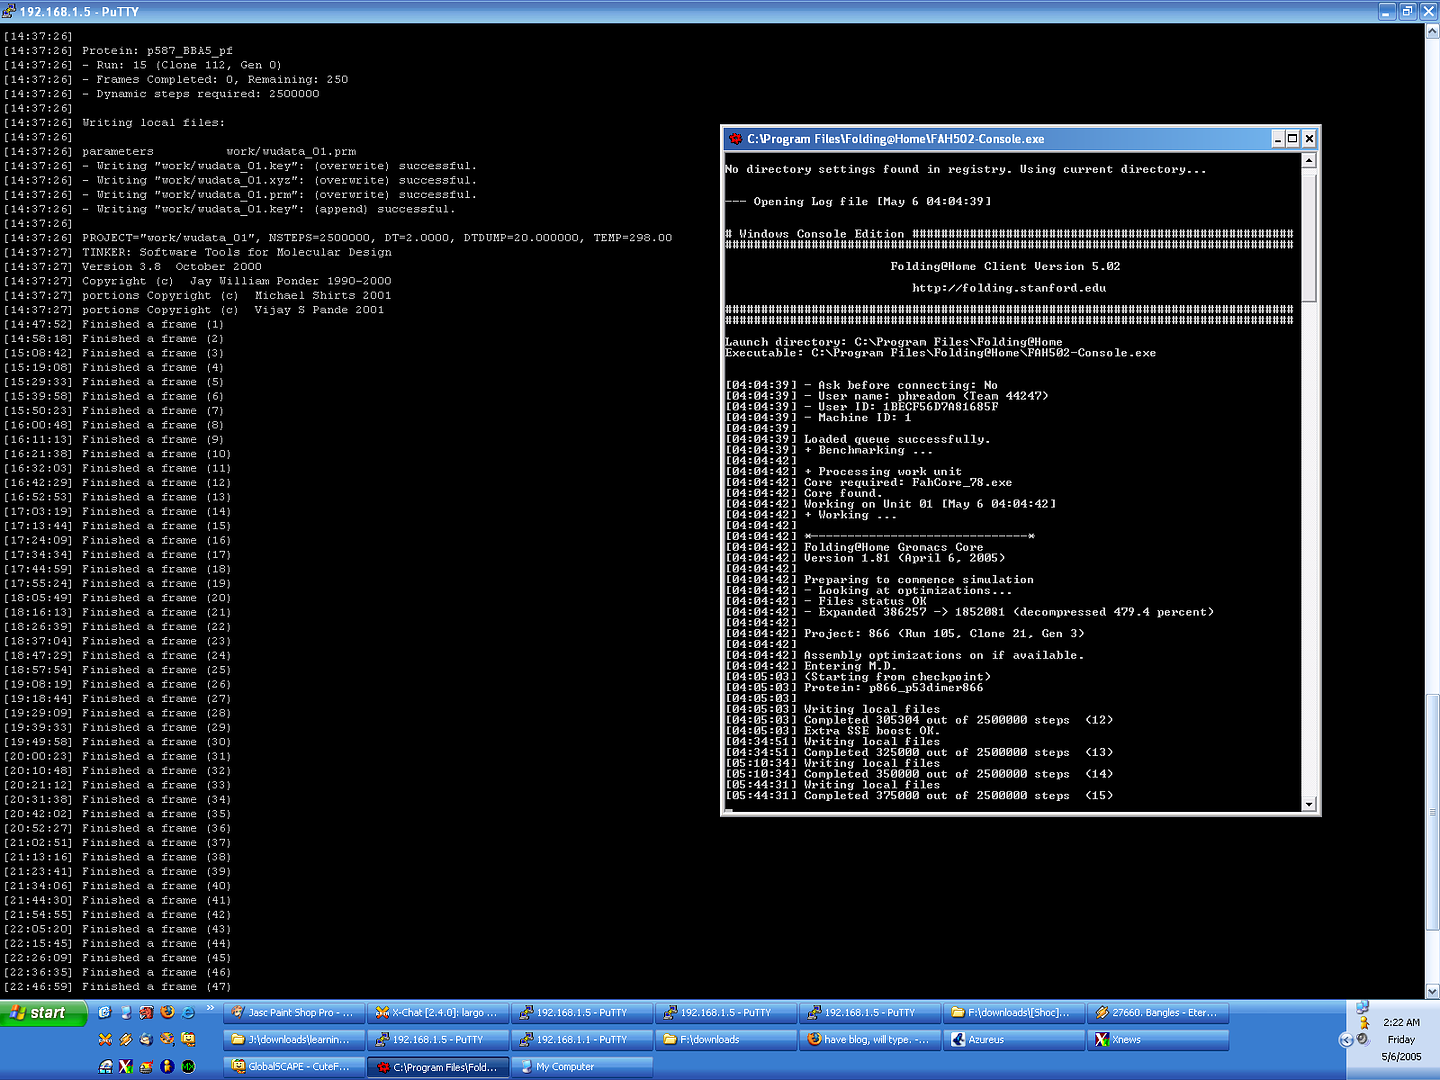 Command Line Clients for Linux (left) and Windows (right)